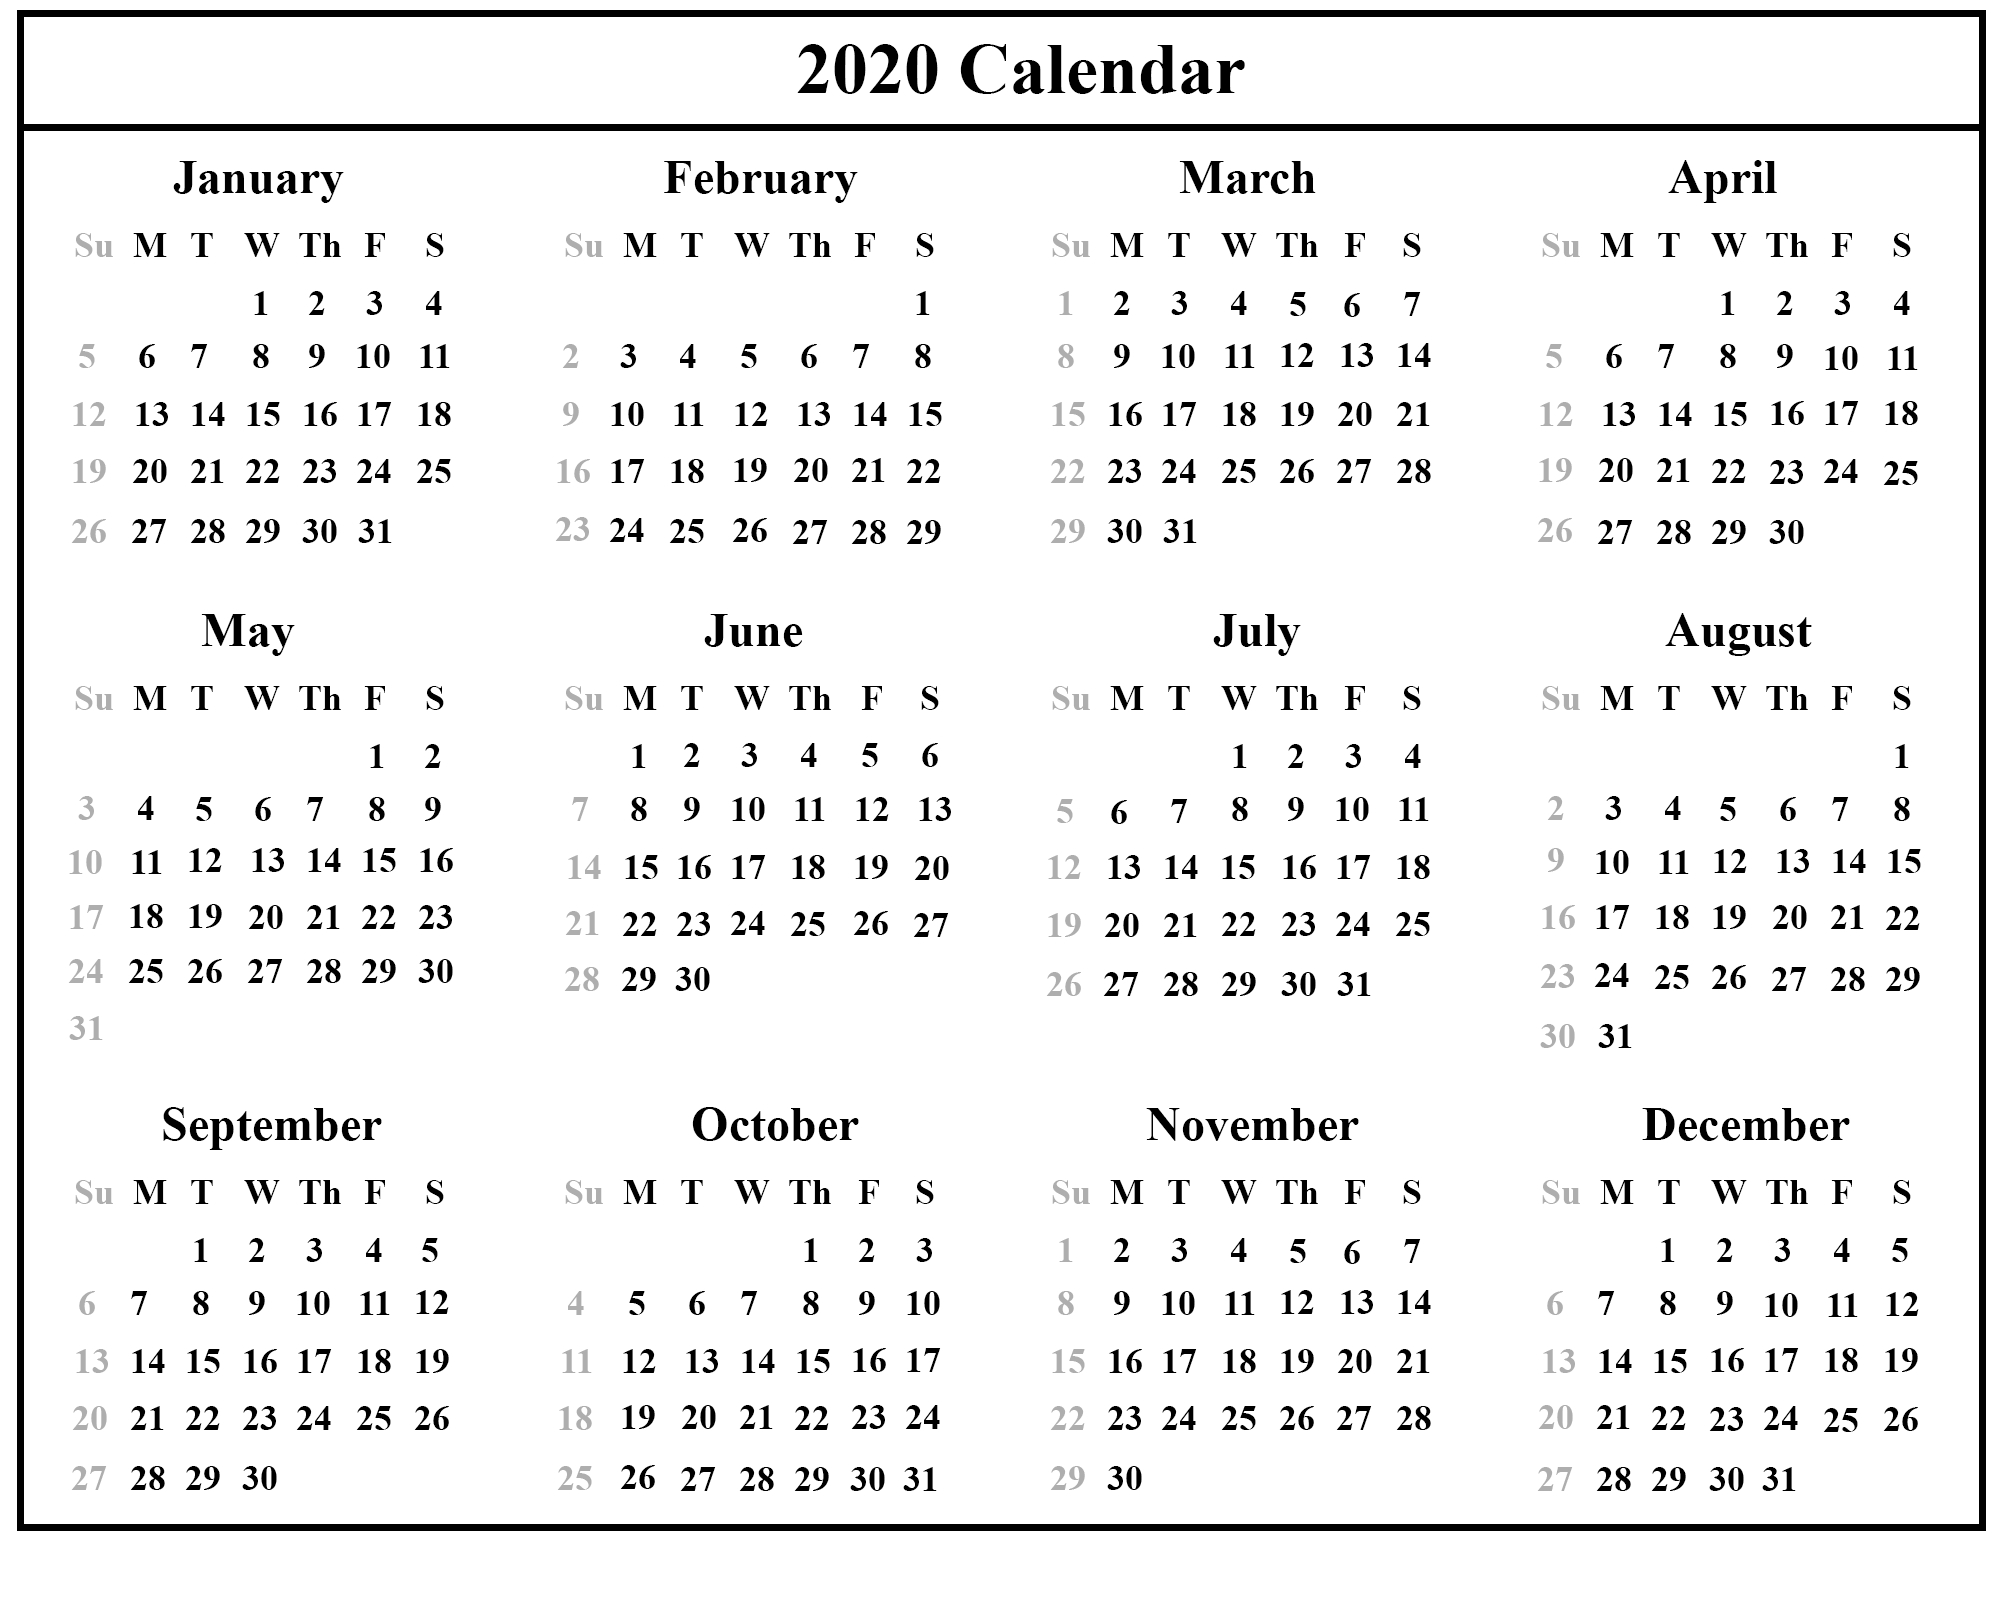 Download This Free 2020 Printable Calendar With A Simple